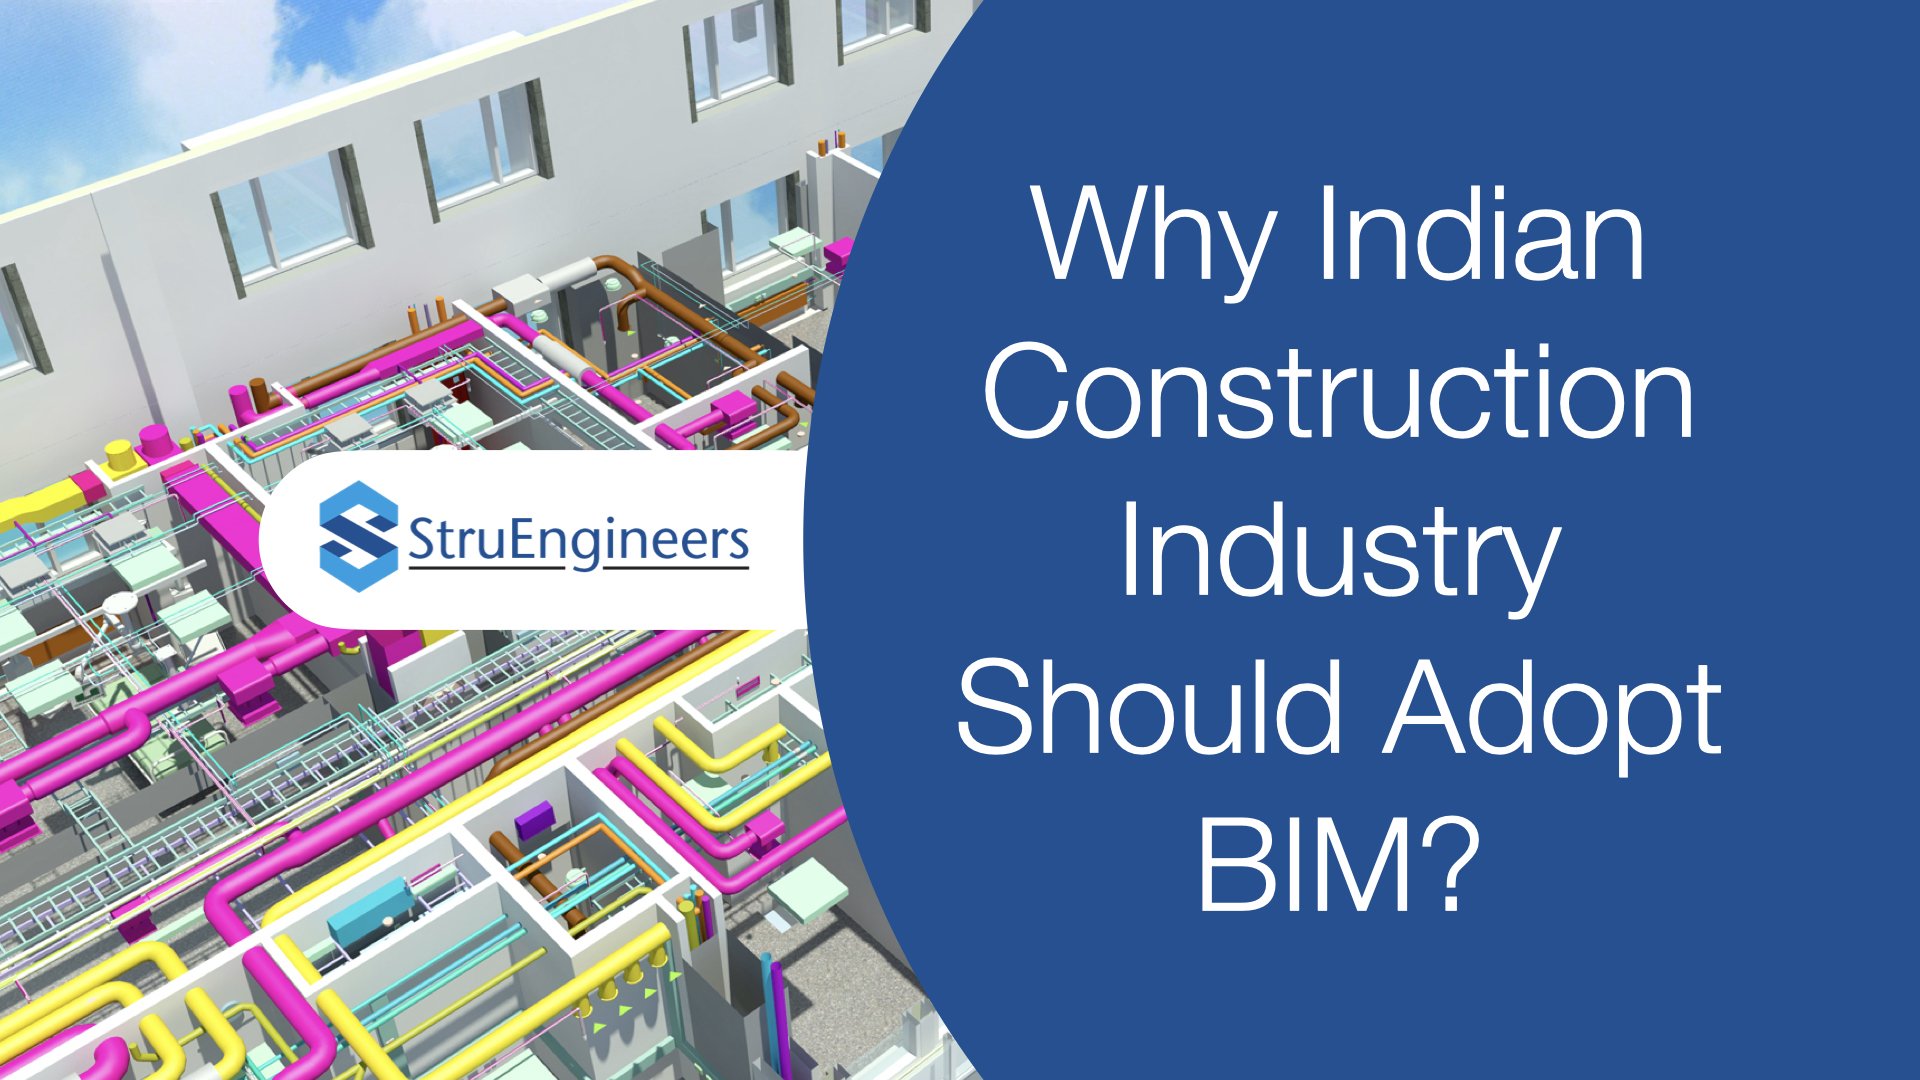 Image for Why Indian Construction Industry Should Adopt BIM?